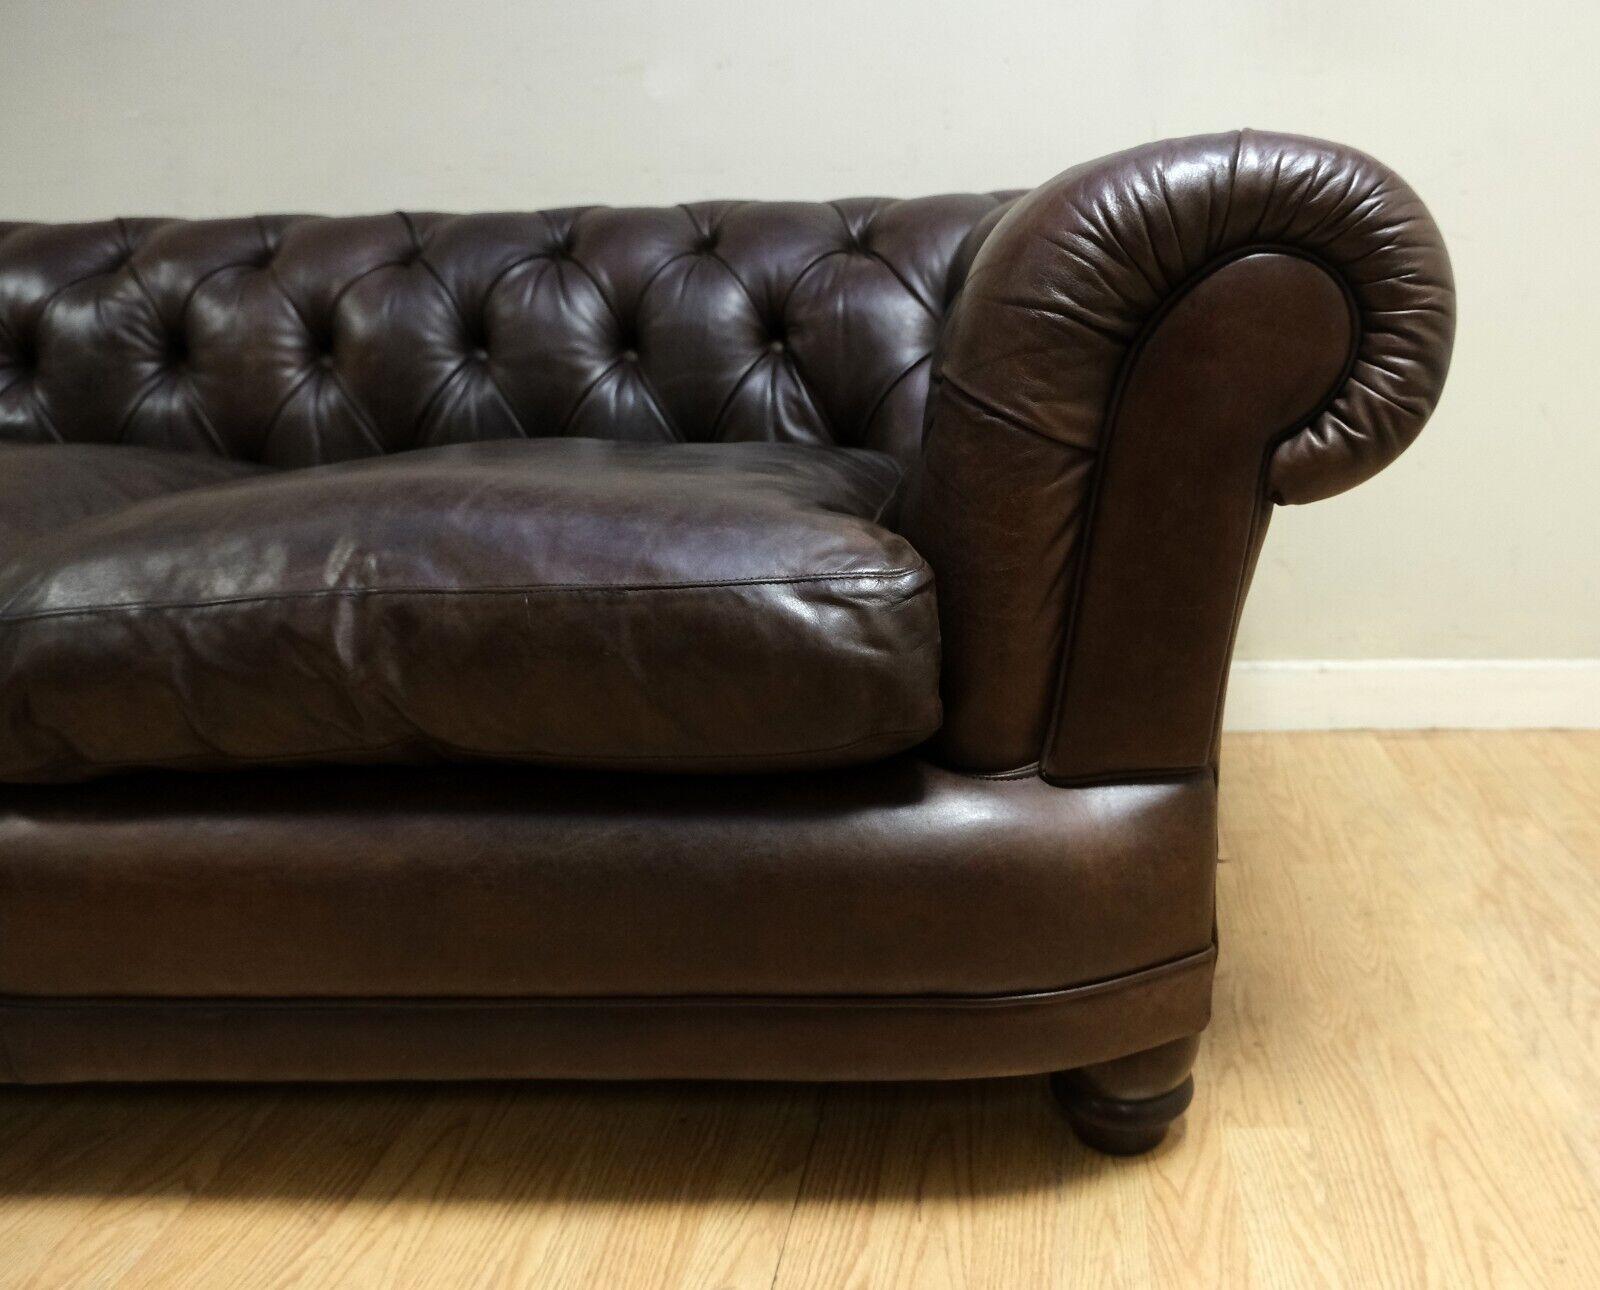 Choclate Brown Chesterfield Two Seater Leather Sofa Feather Filled Cushions 11